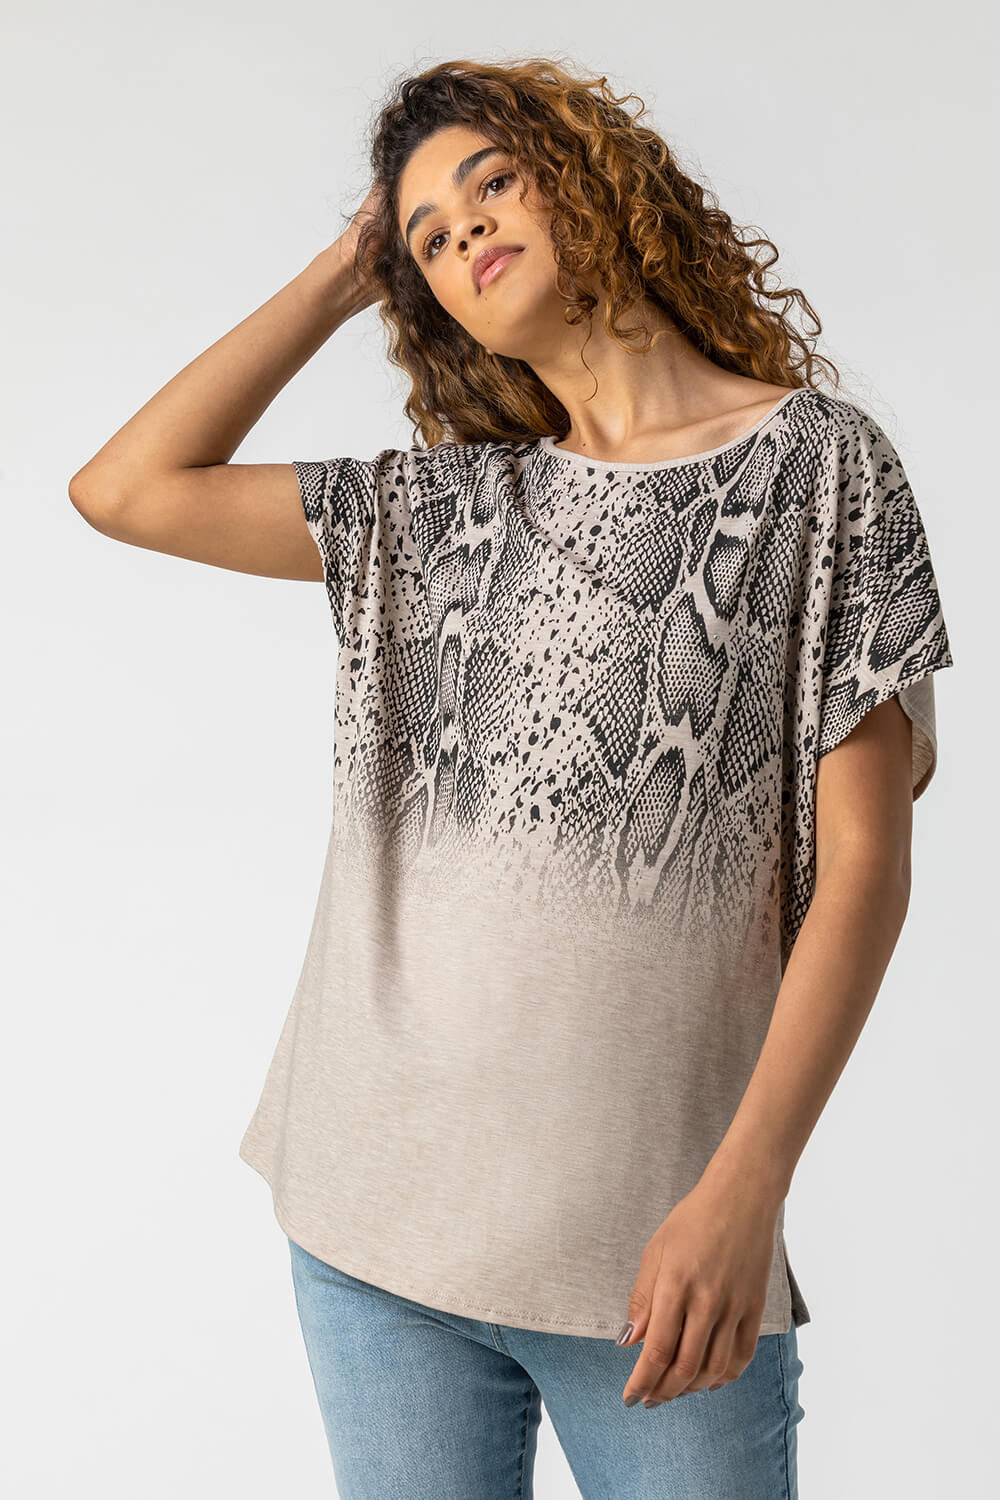 Neutral Snake Print Ombre Top, Image 5 of 5